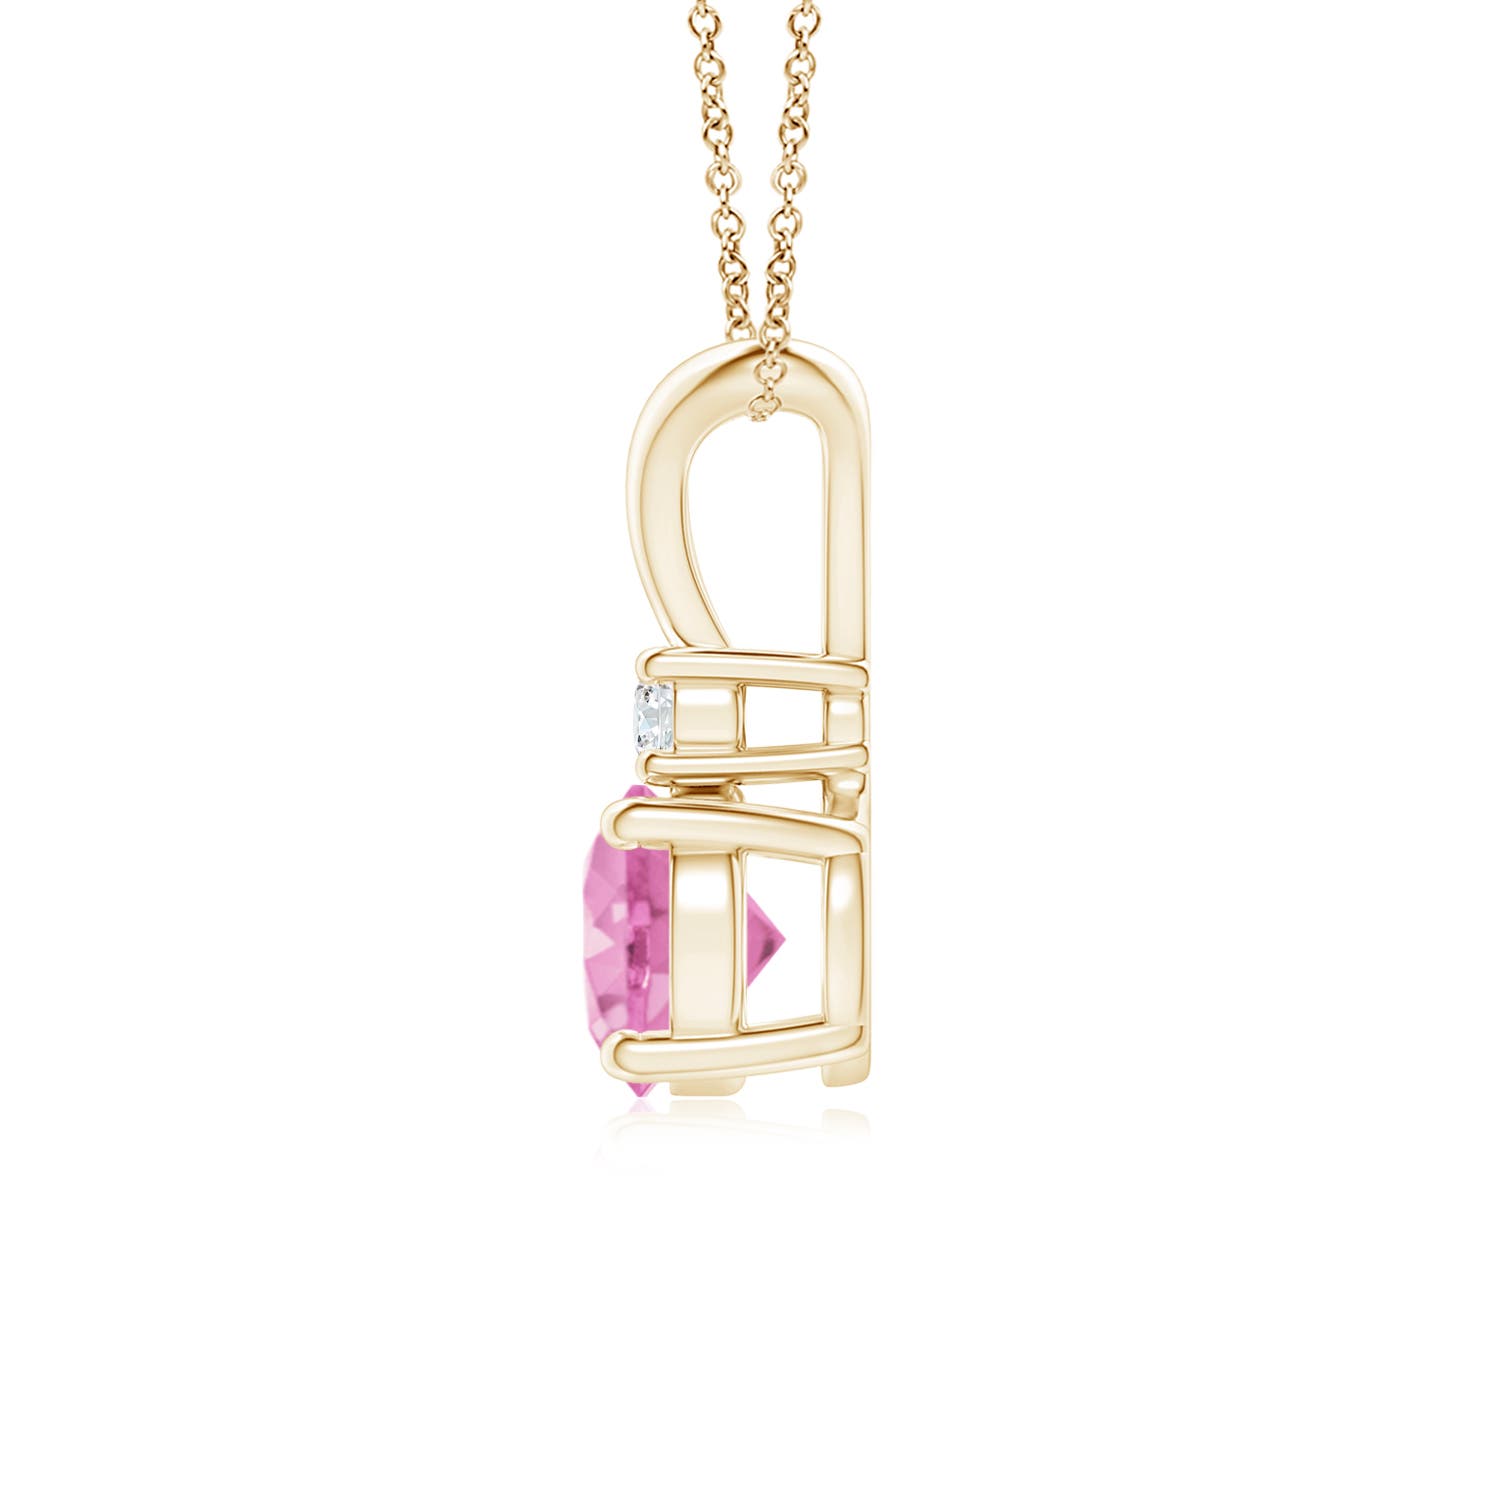 A - Pink Sapphire / 1.04 CT / 14 KT Yellow Gold